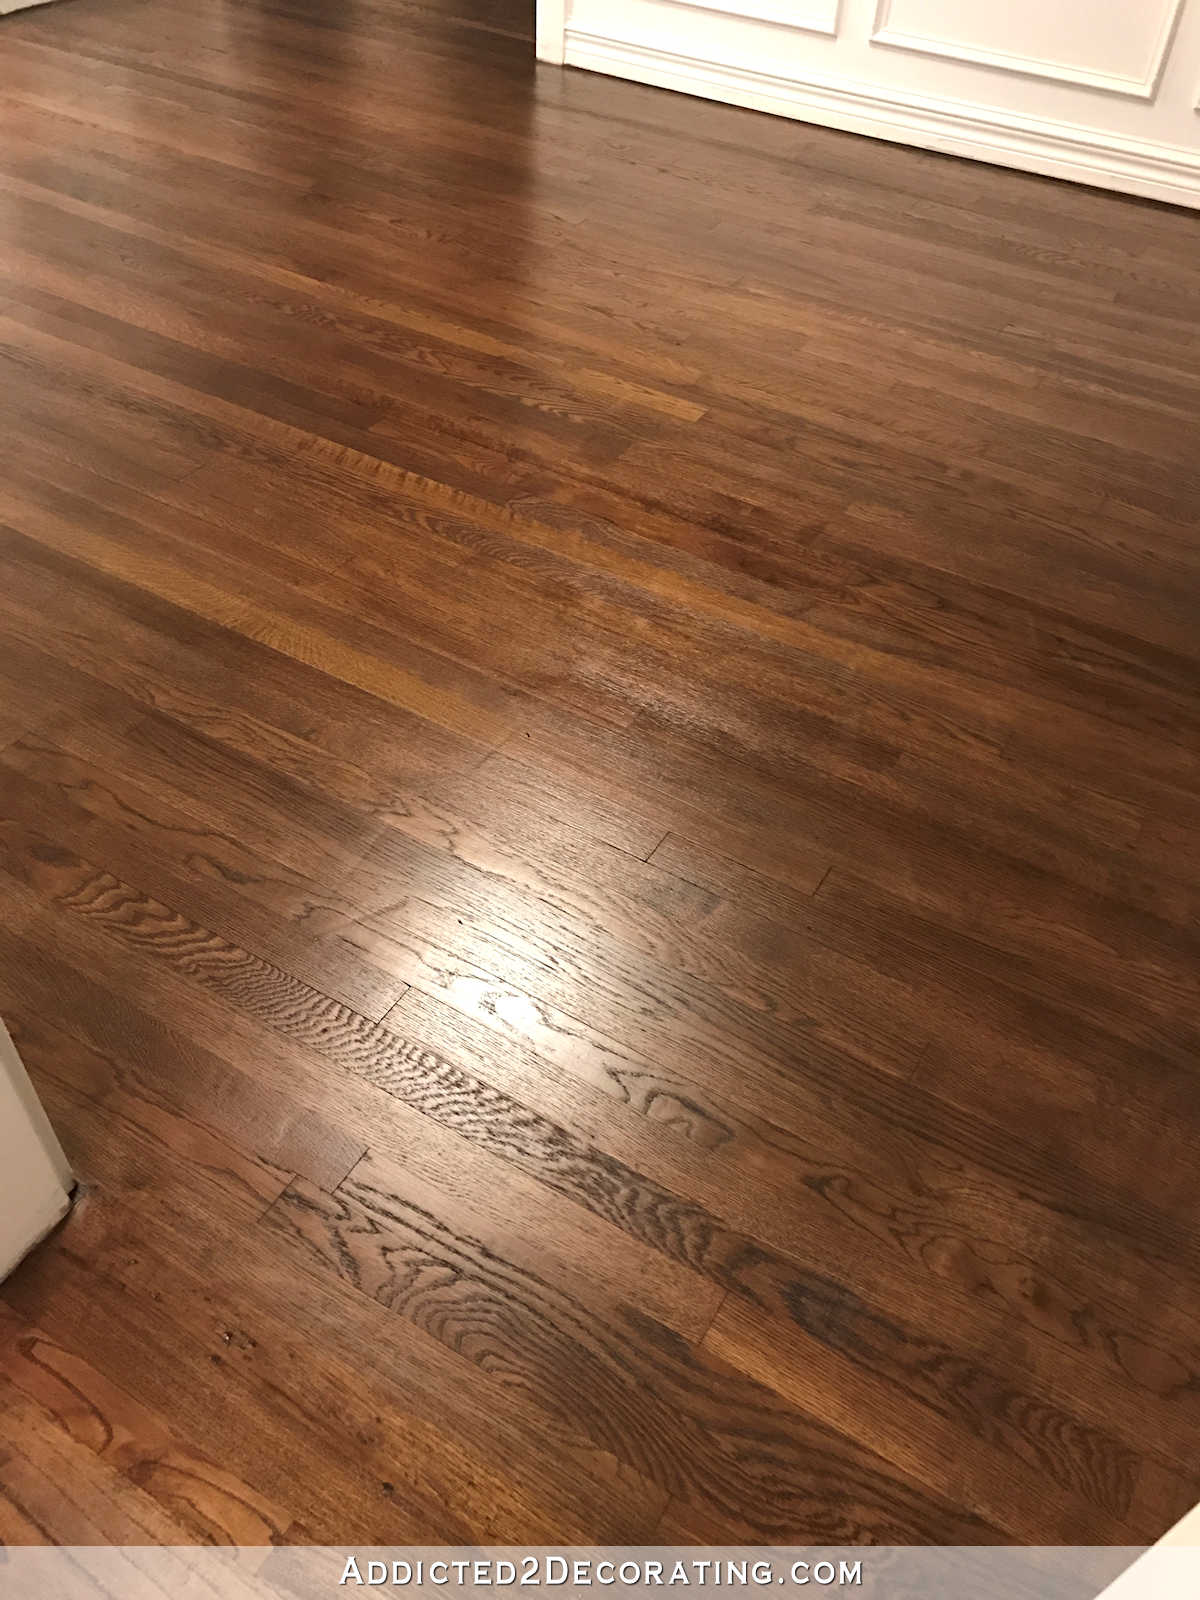 refinishing red oak hardwood floors - adding stain to first coat of polyurethane to darken the color - music room